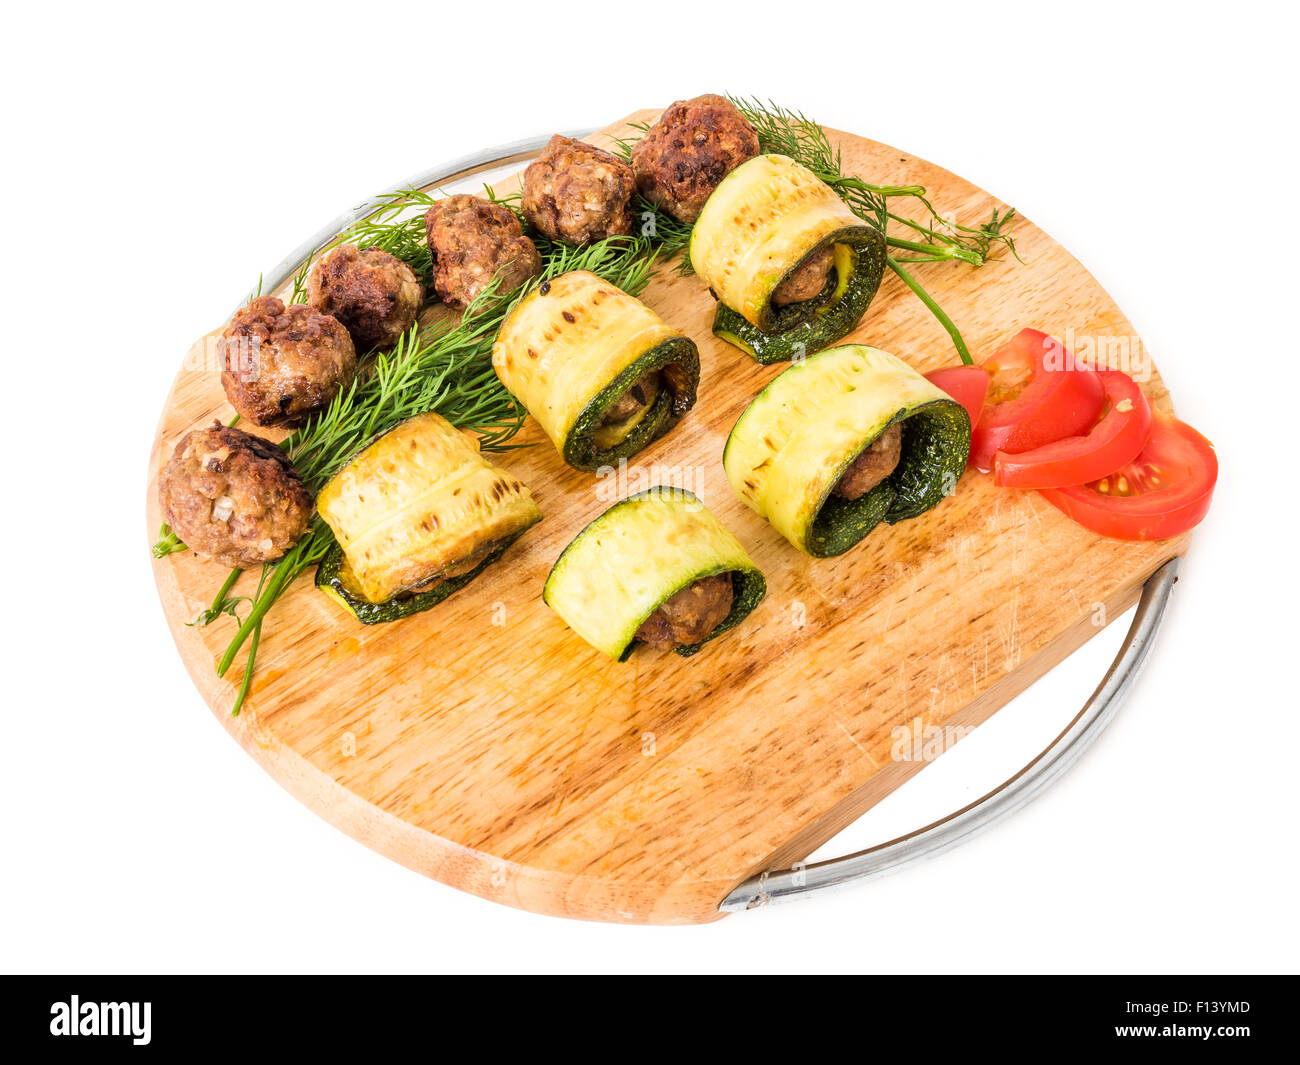 Meatball kofte appetizers mediterranean mezze food with marrow, on a wood dish isolated on white studio background Stock Photo